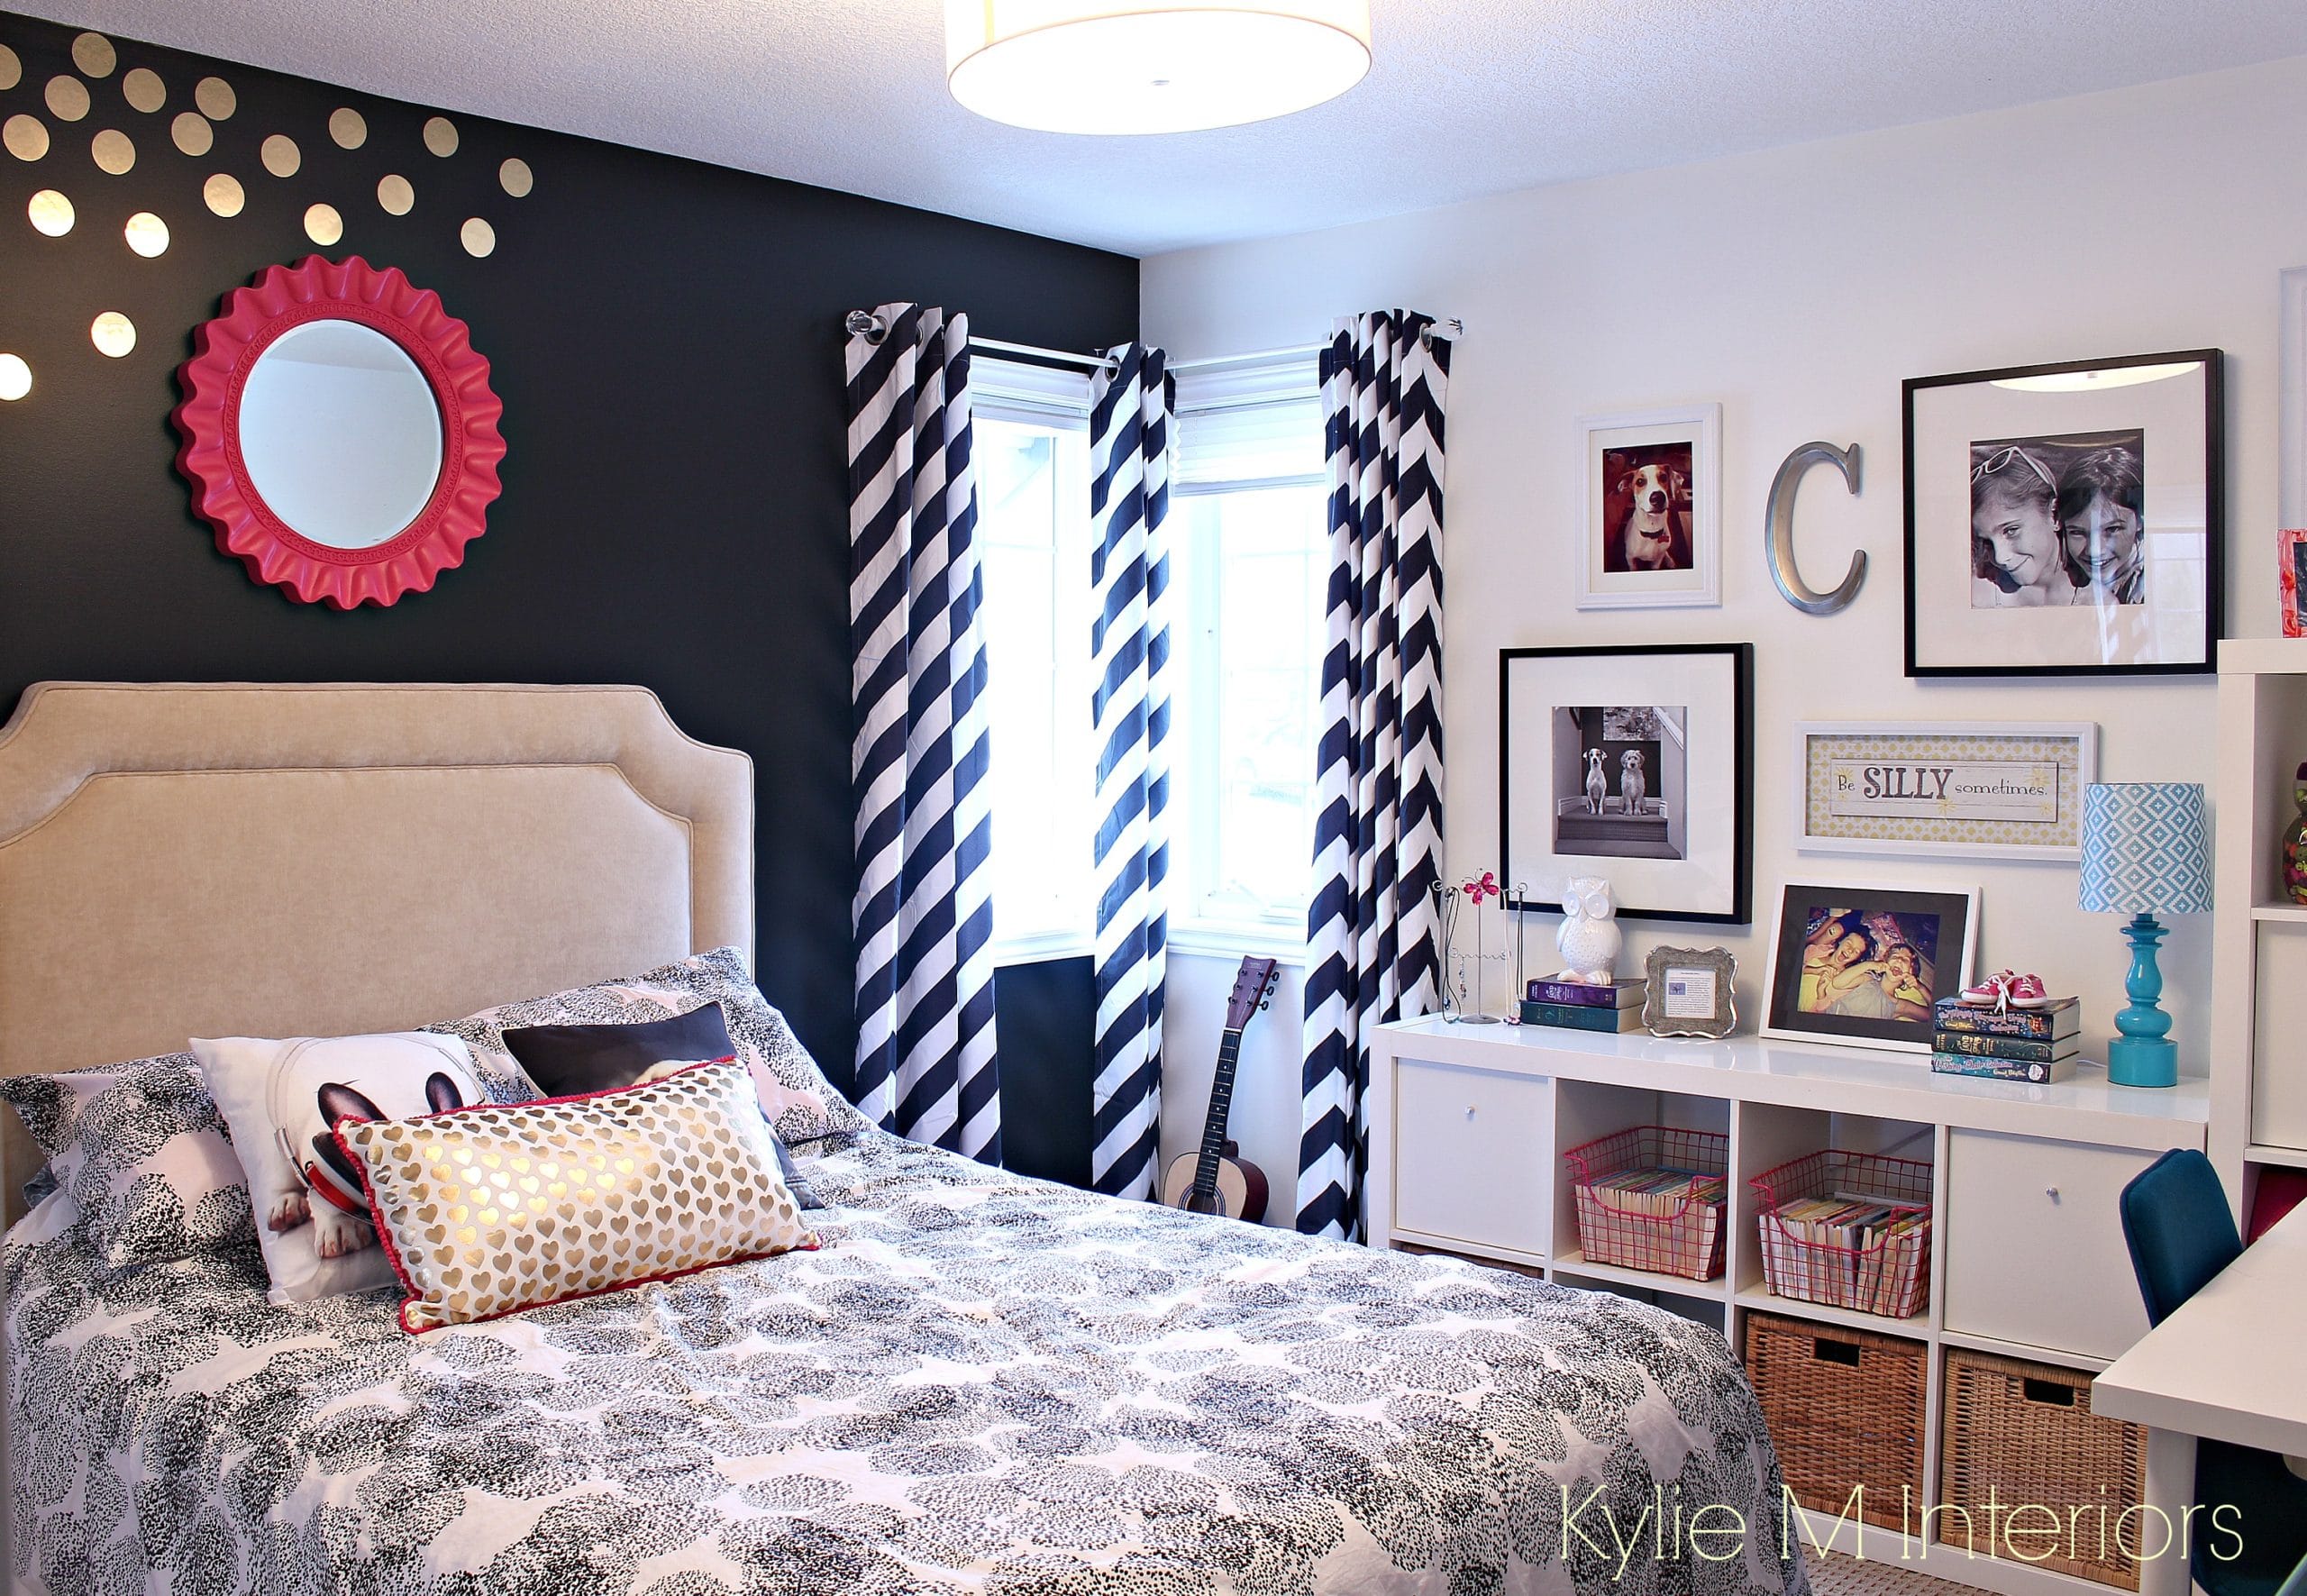 Tween or teen color and decorating ideas. Black and Benjamin Moore Simply White with hot pink accents and photo gallery wall. Ikea Kallax units by Kylie M Interiors